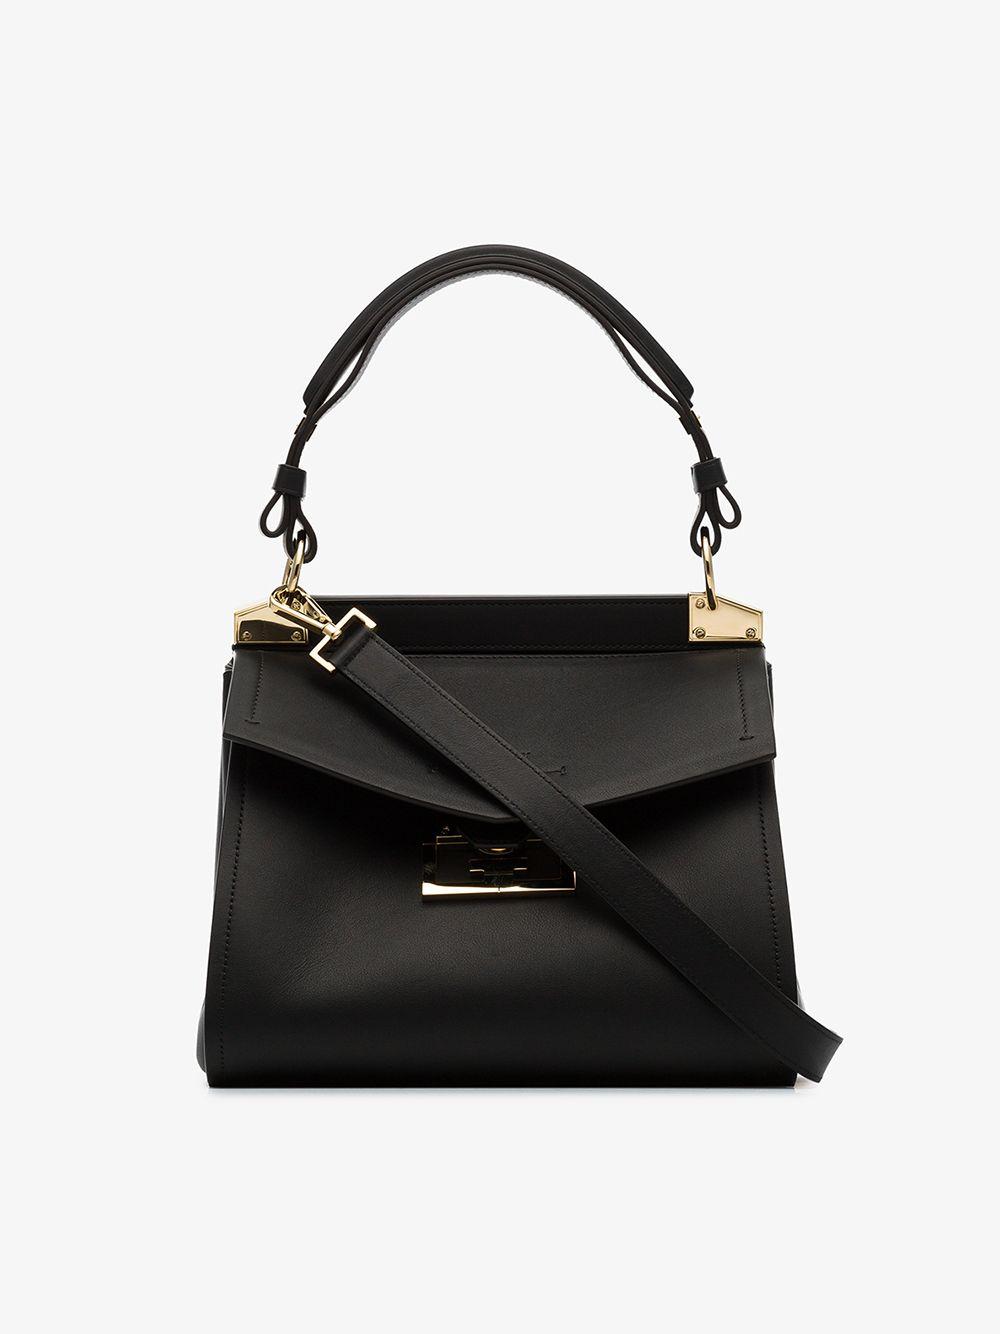 Givenchy Mystic Small Leather Shoulder Bag in Black - Lyst